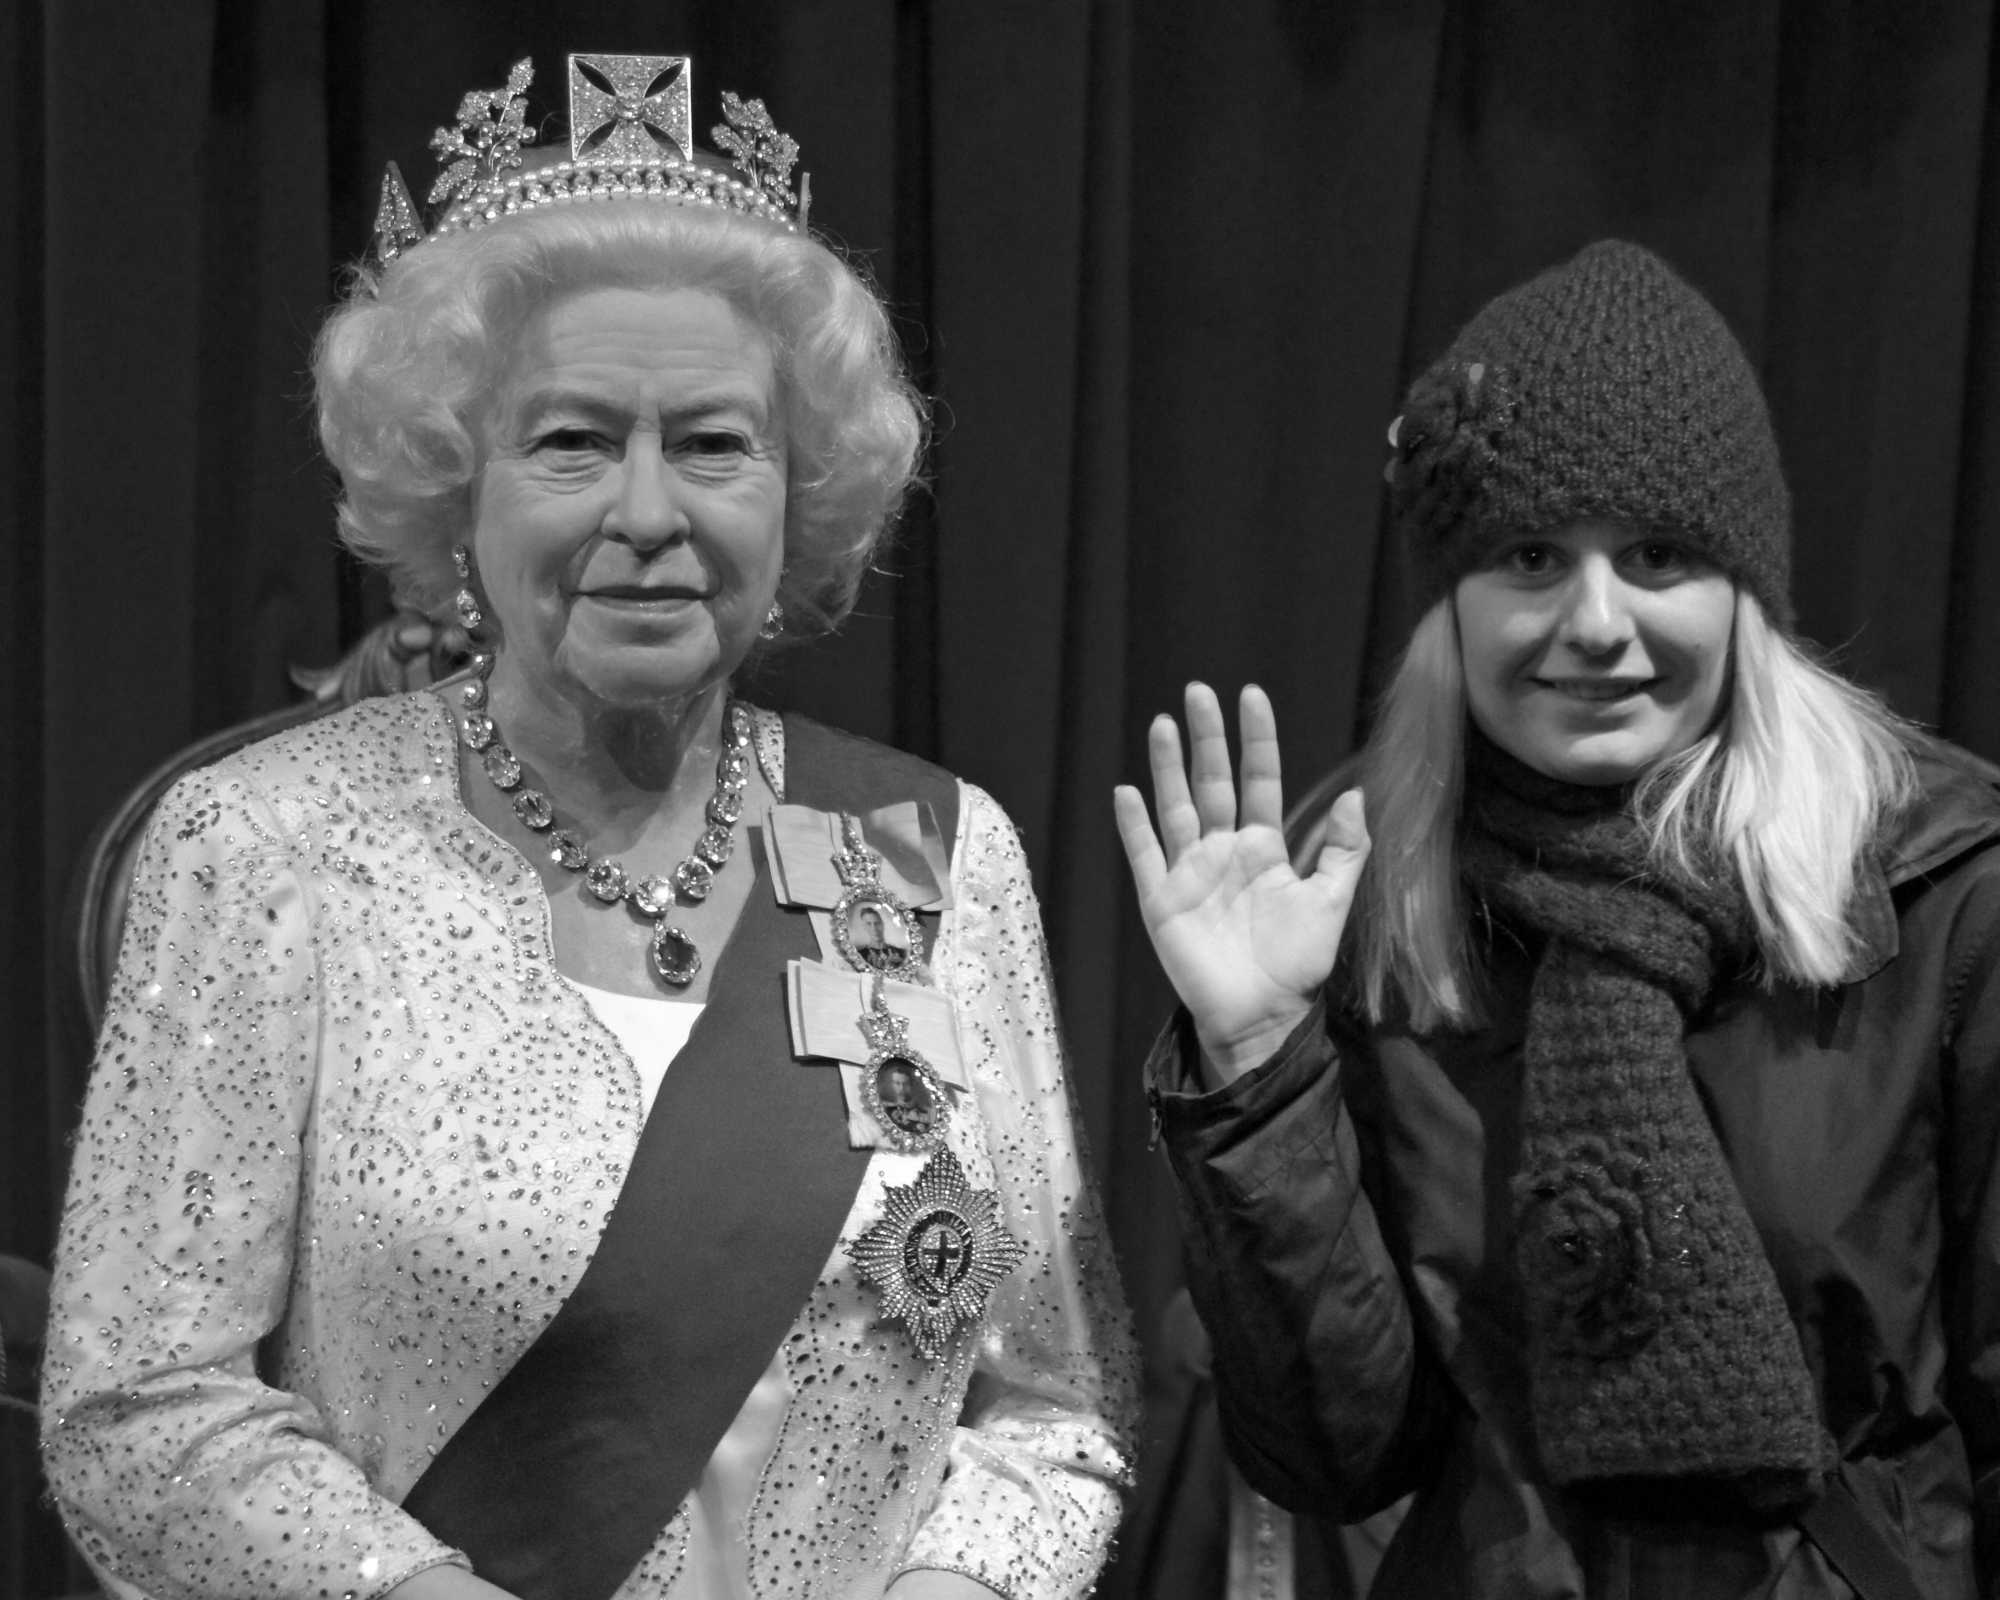 Lisa and The Queen